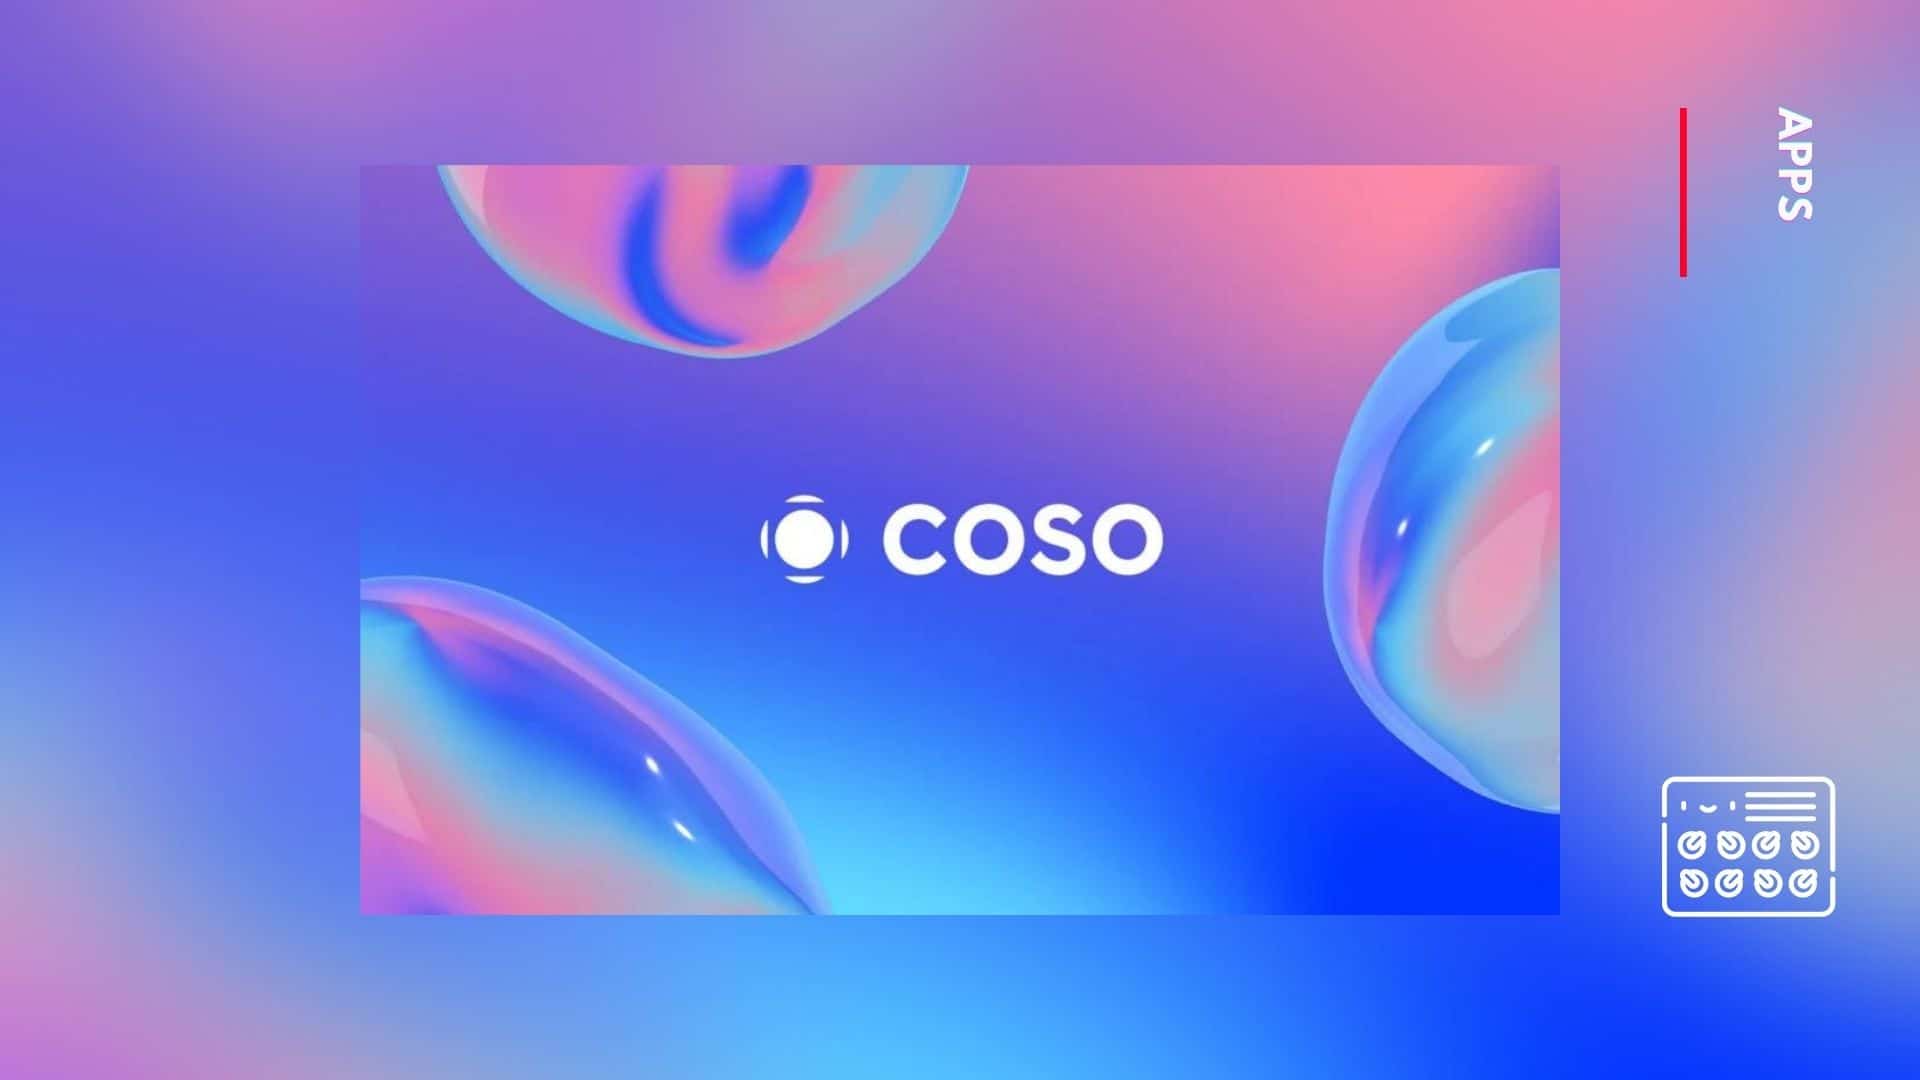 Splice introduces CoSo, an AI-assisted "music creation surface"